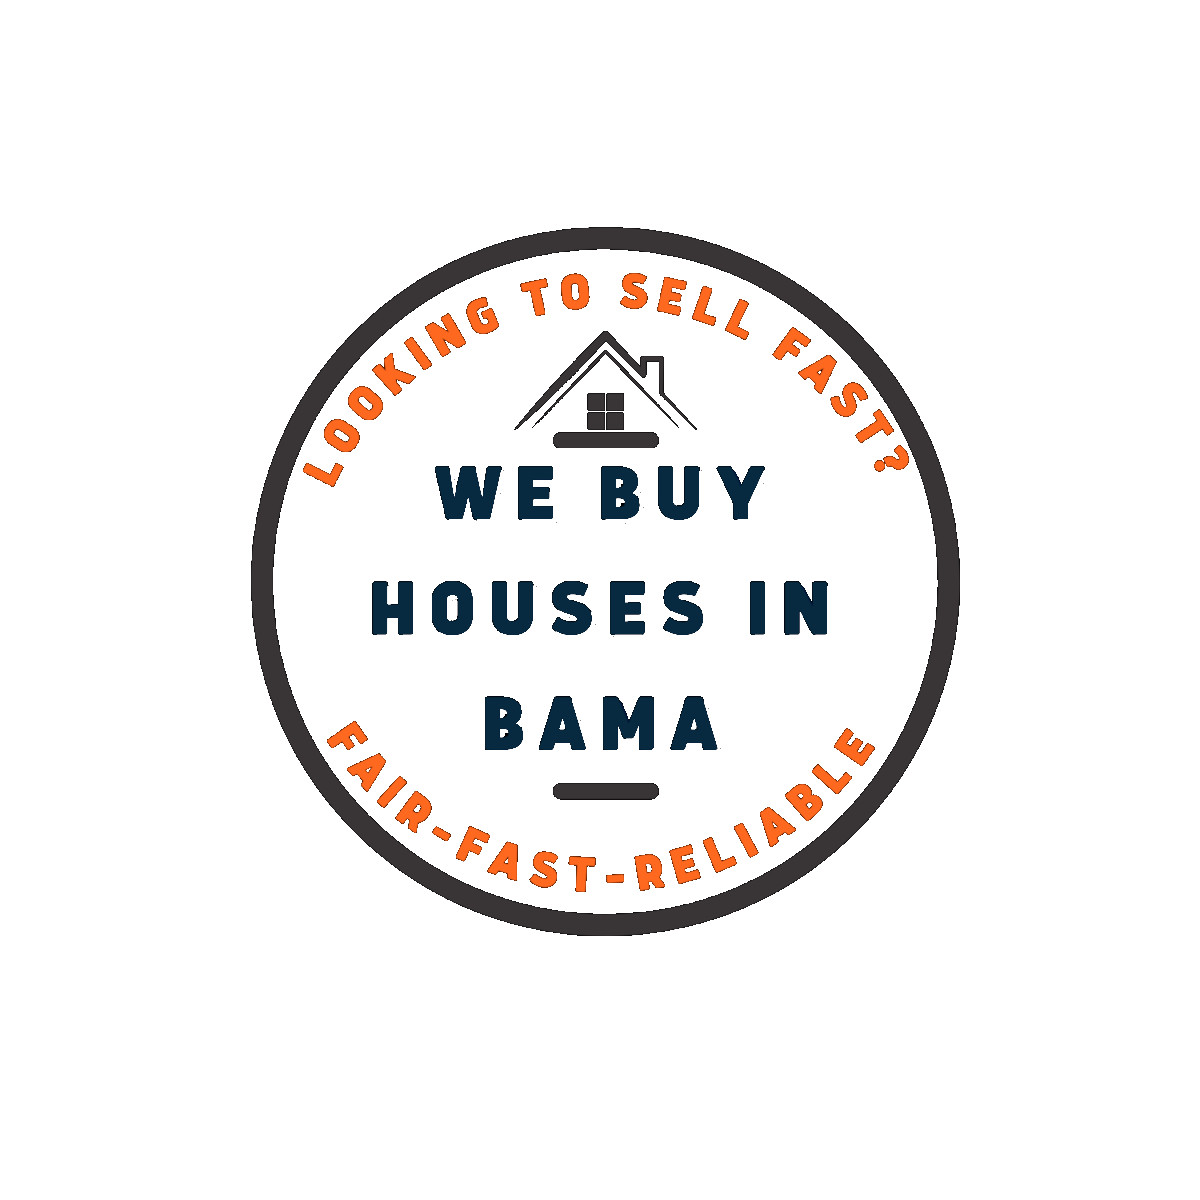 We Buy Houses In Bama review